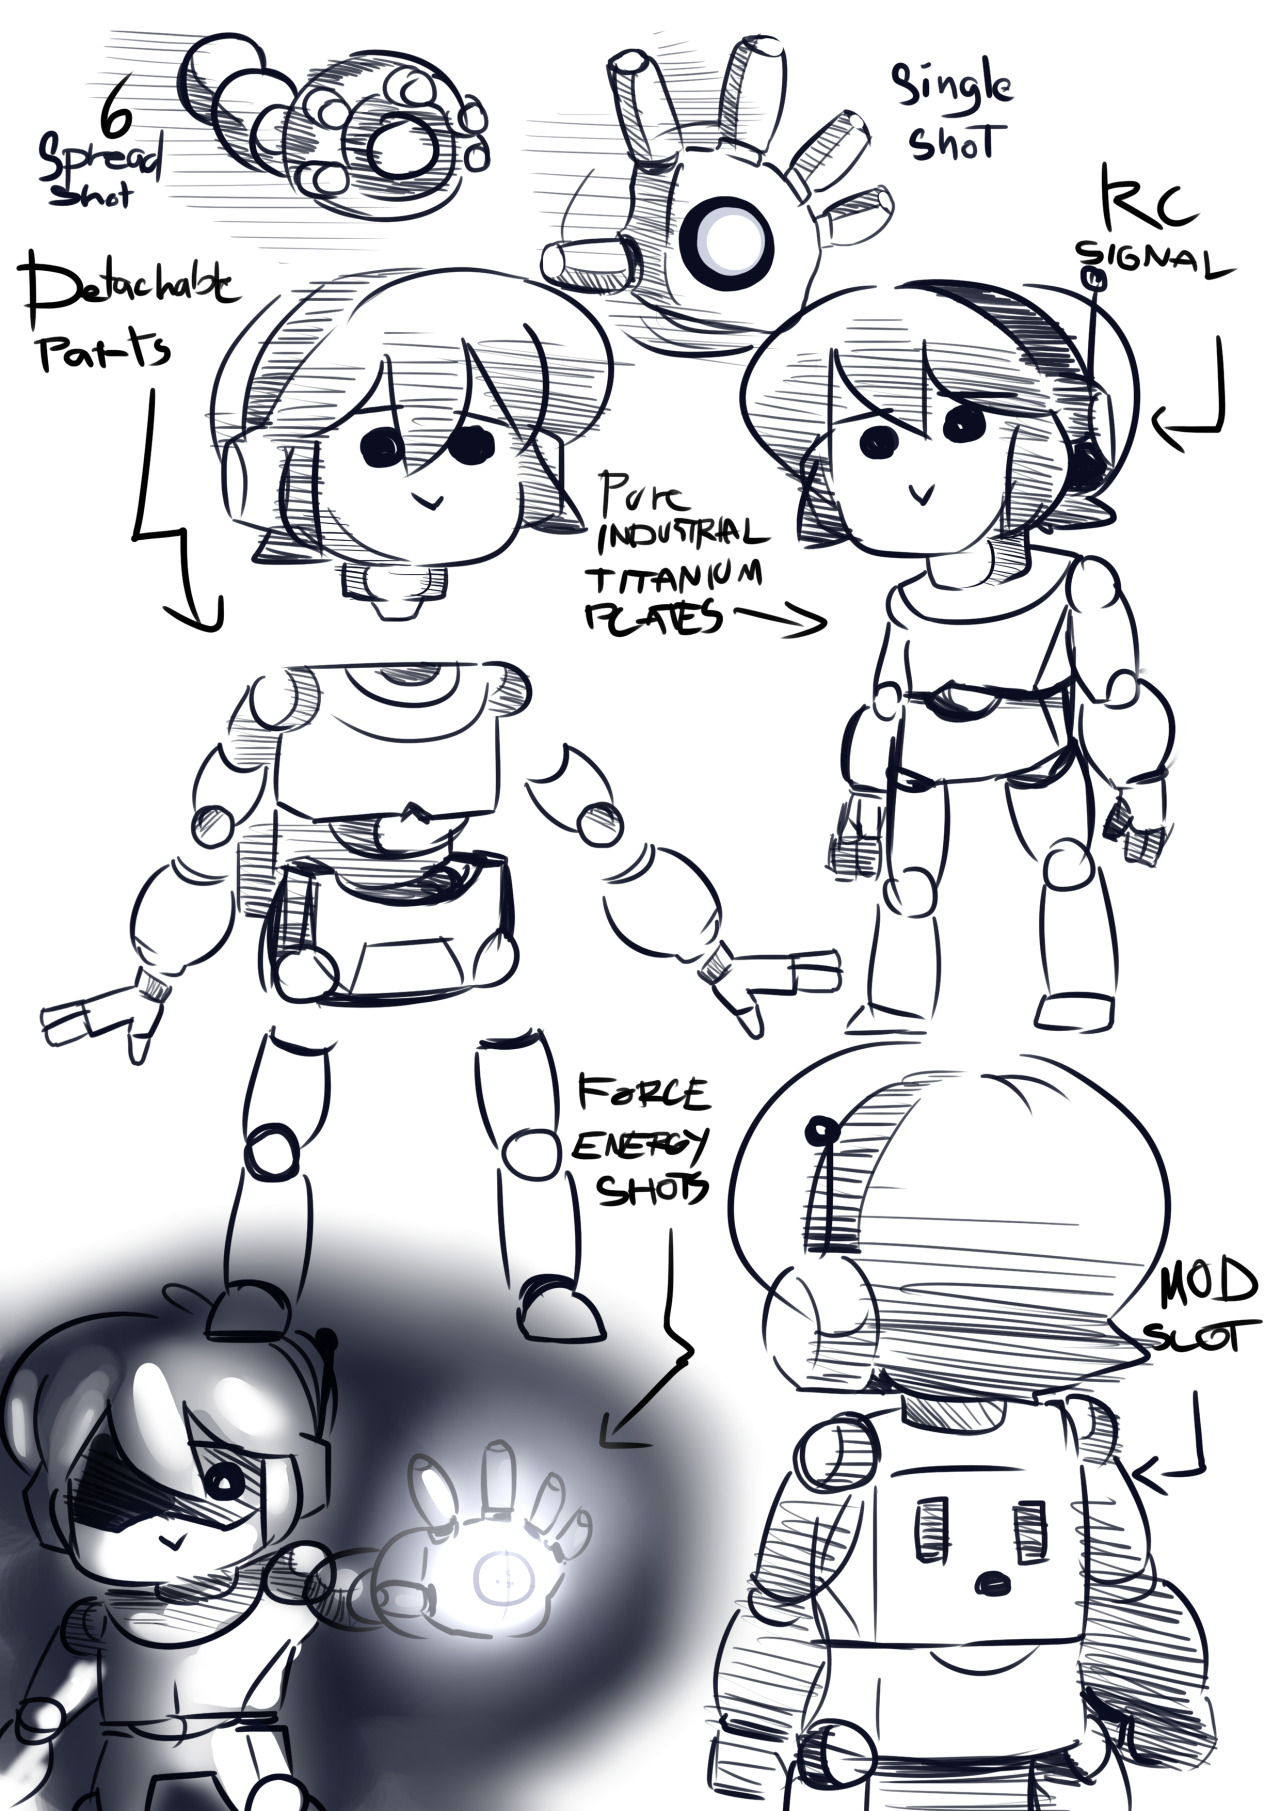 doing another webcomic! “Swapbots”design for my characters.  made a study sketch